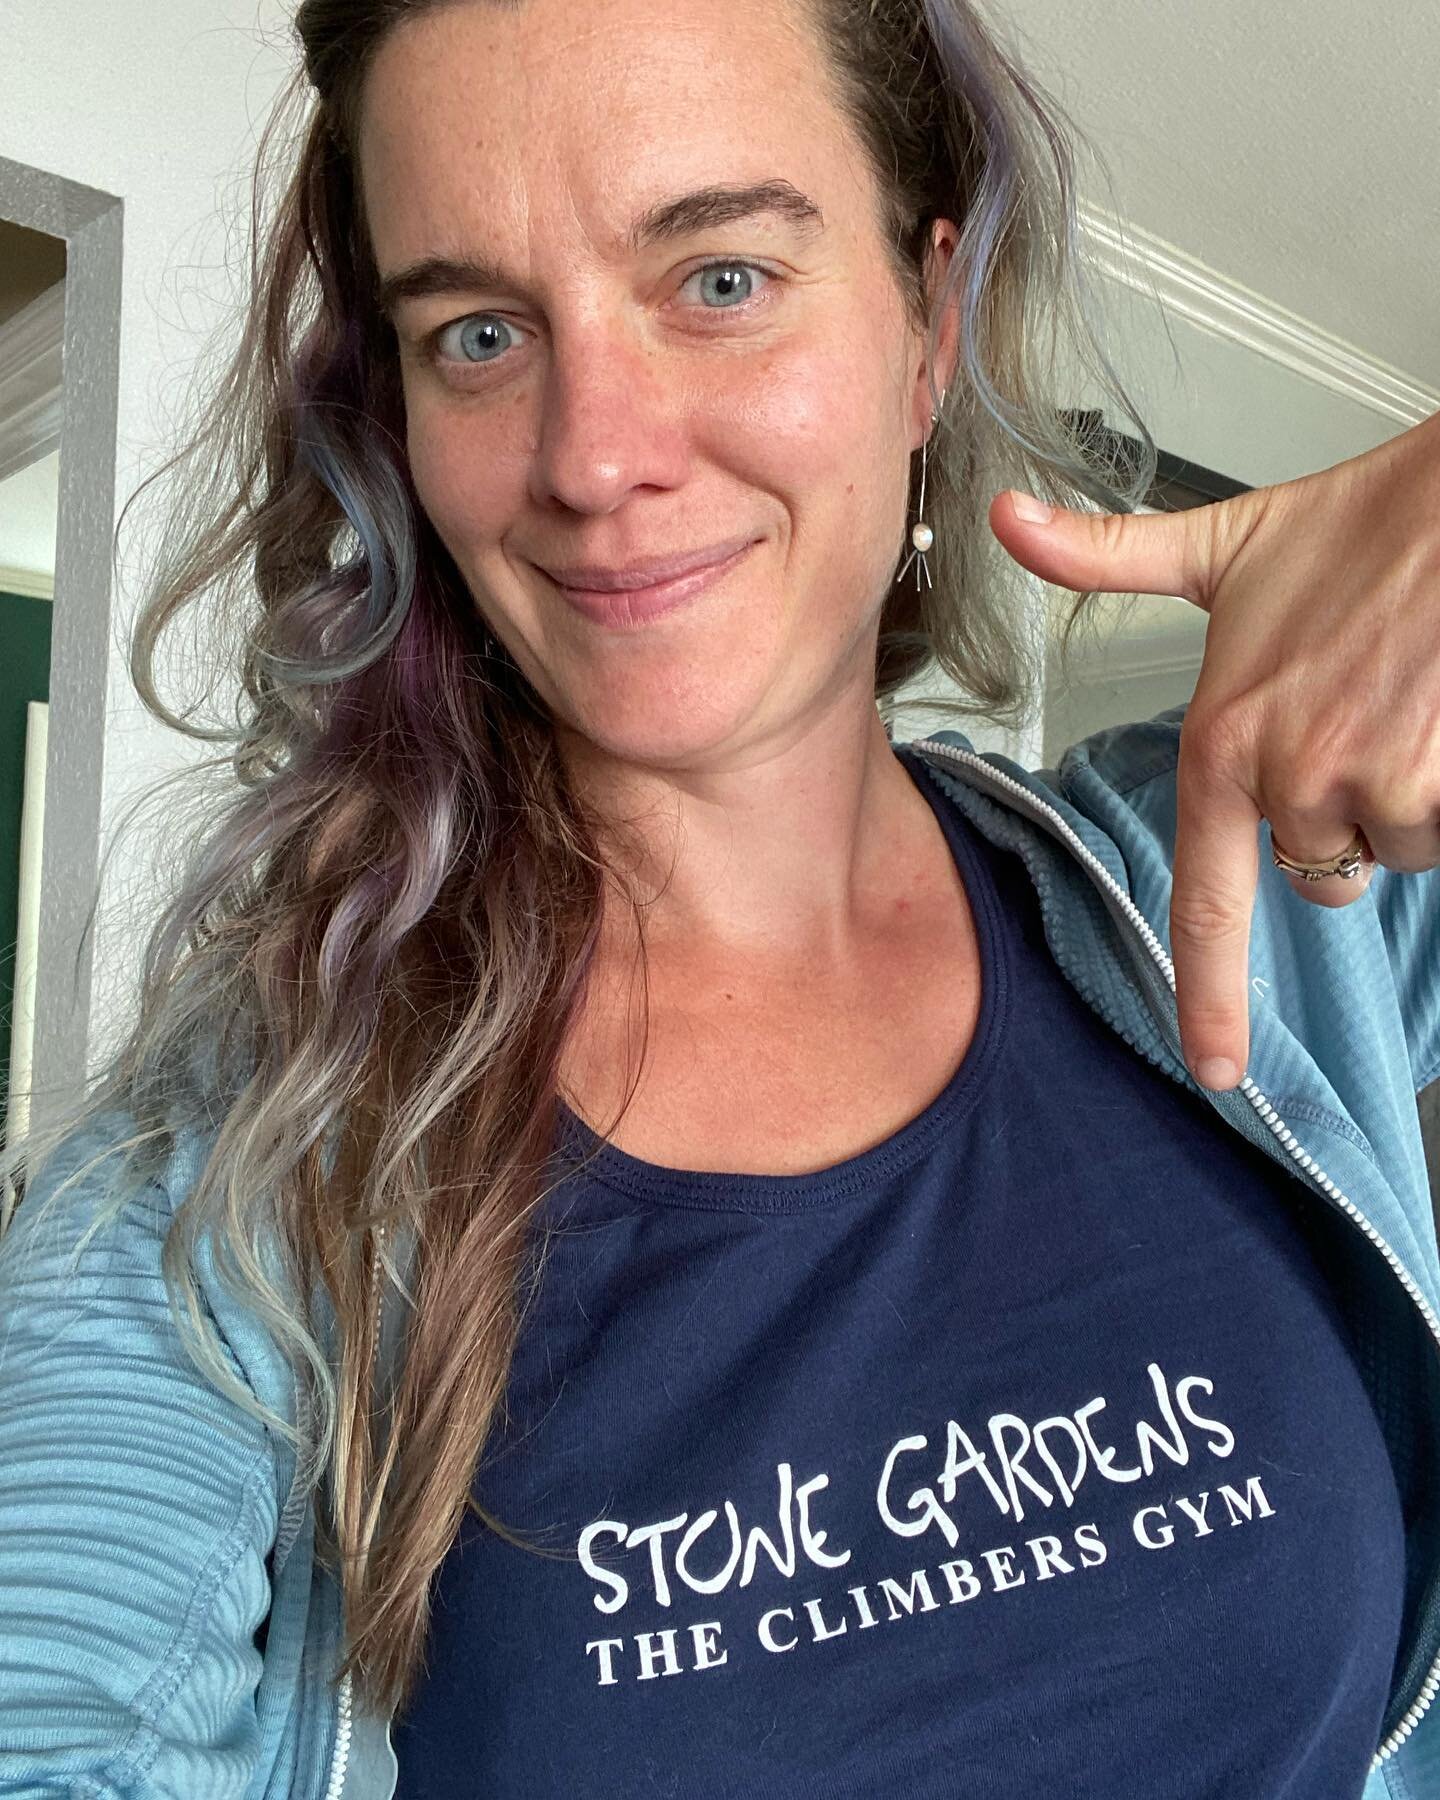 Guess what. Yup. That&rsquo;s right. See you on the third Thursday of the month at Stoney G! Stone Gardens is my home base, the place I go when I&rsquo;m happy and when I need to get out frustration. And I get to share it with YOU again. Just confirm